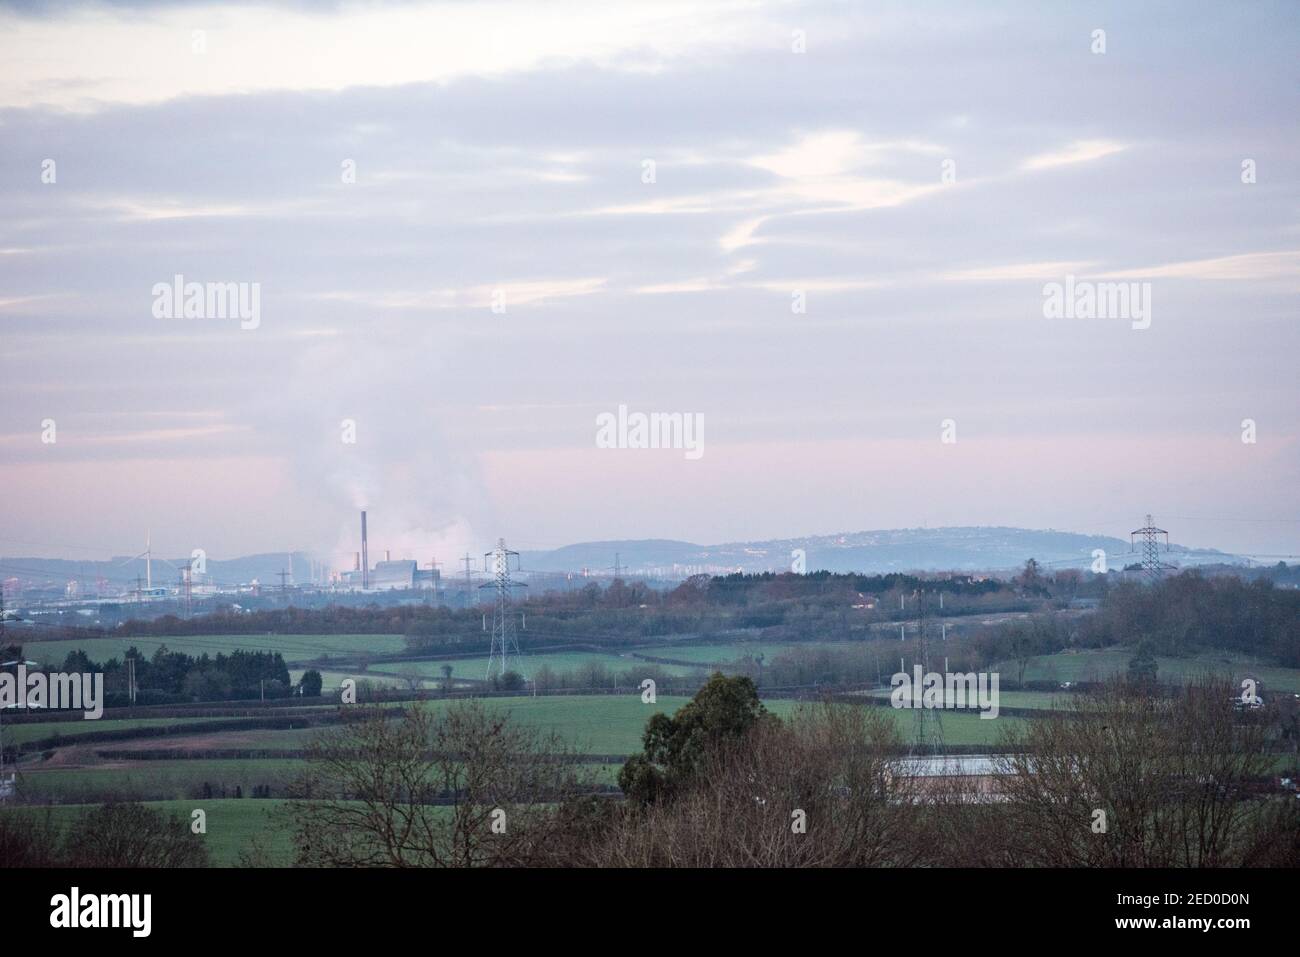 View across countryside to industrial Avonmouth and the Seabank Power Station pumping out plumes of steam, over wind turbines and electricity pylons Stock Photo